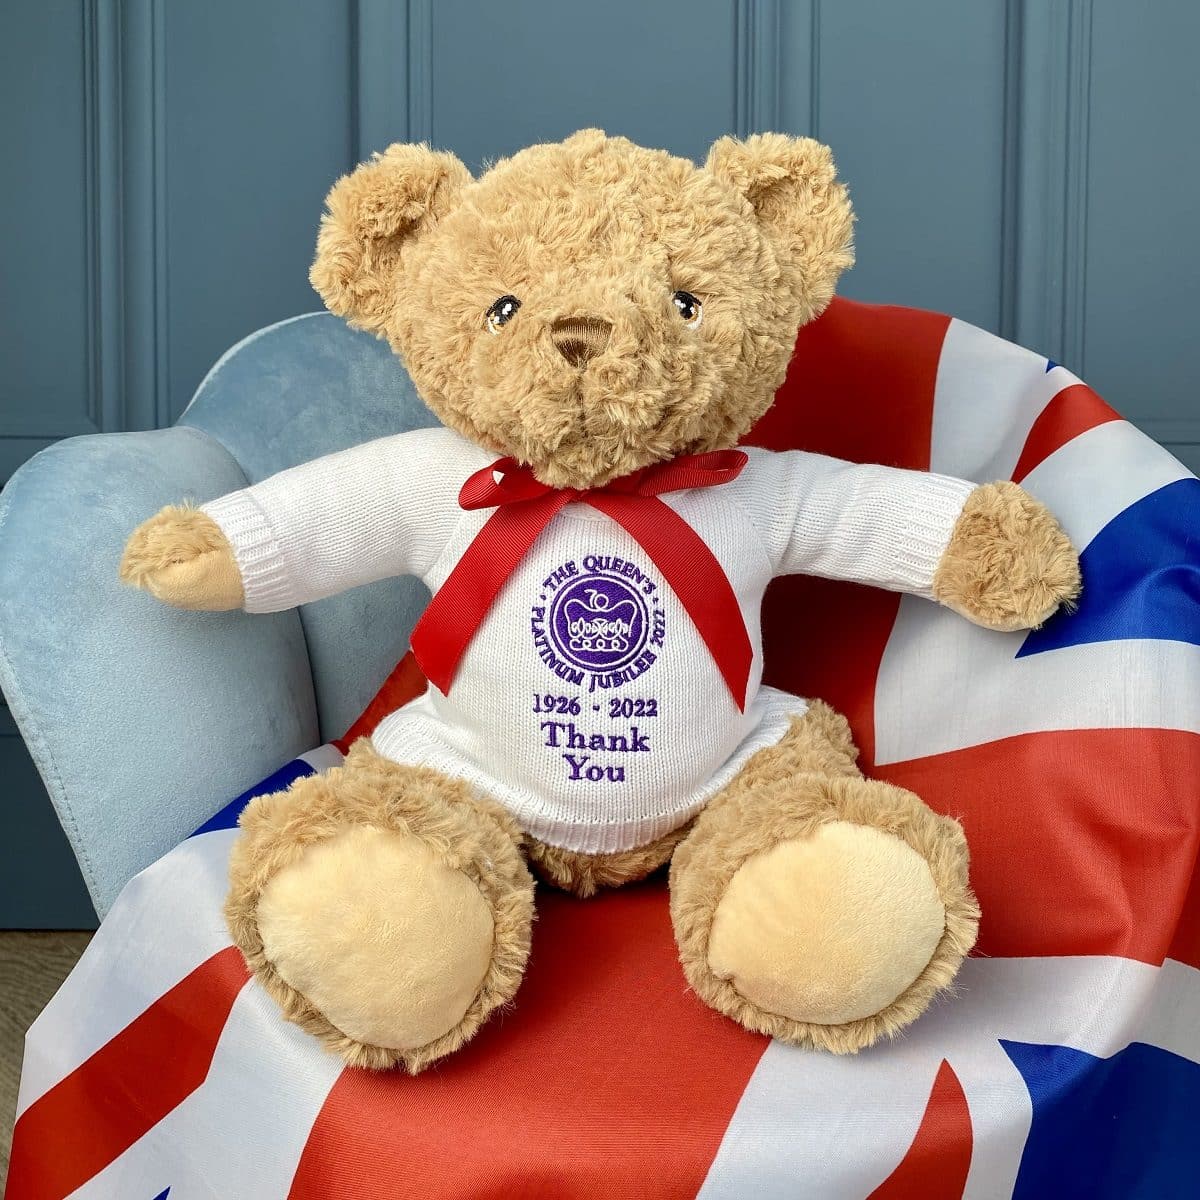 Queen Elizabeth II remembrance large teddy bear – limited edition Personalised Soft Toys 2